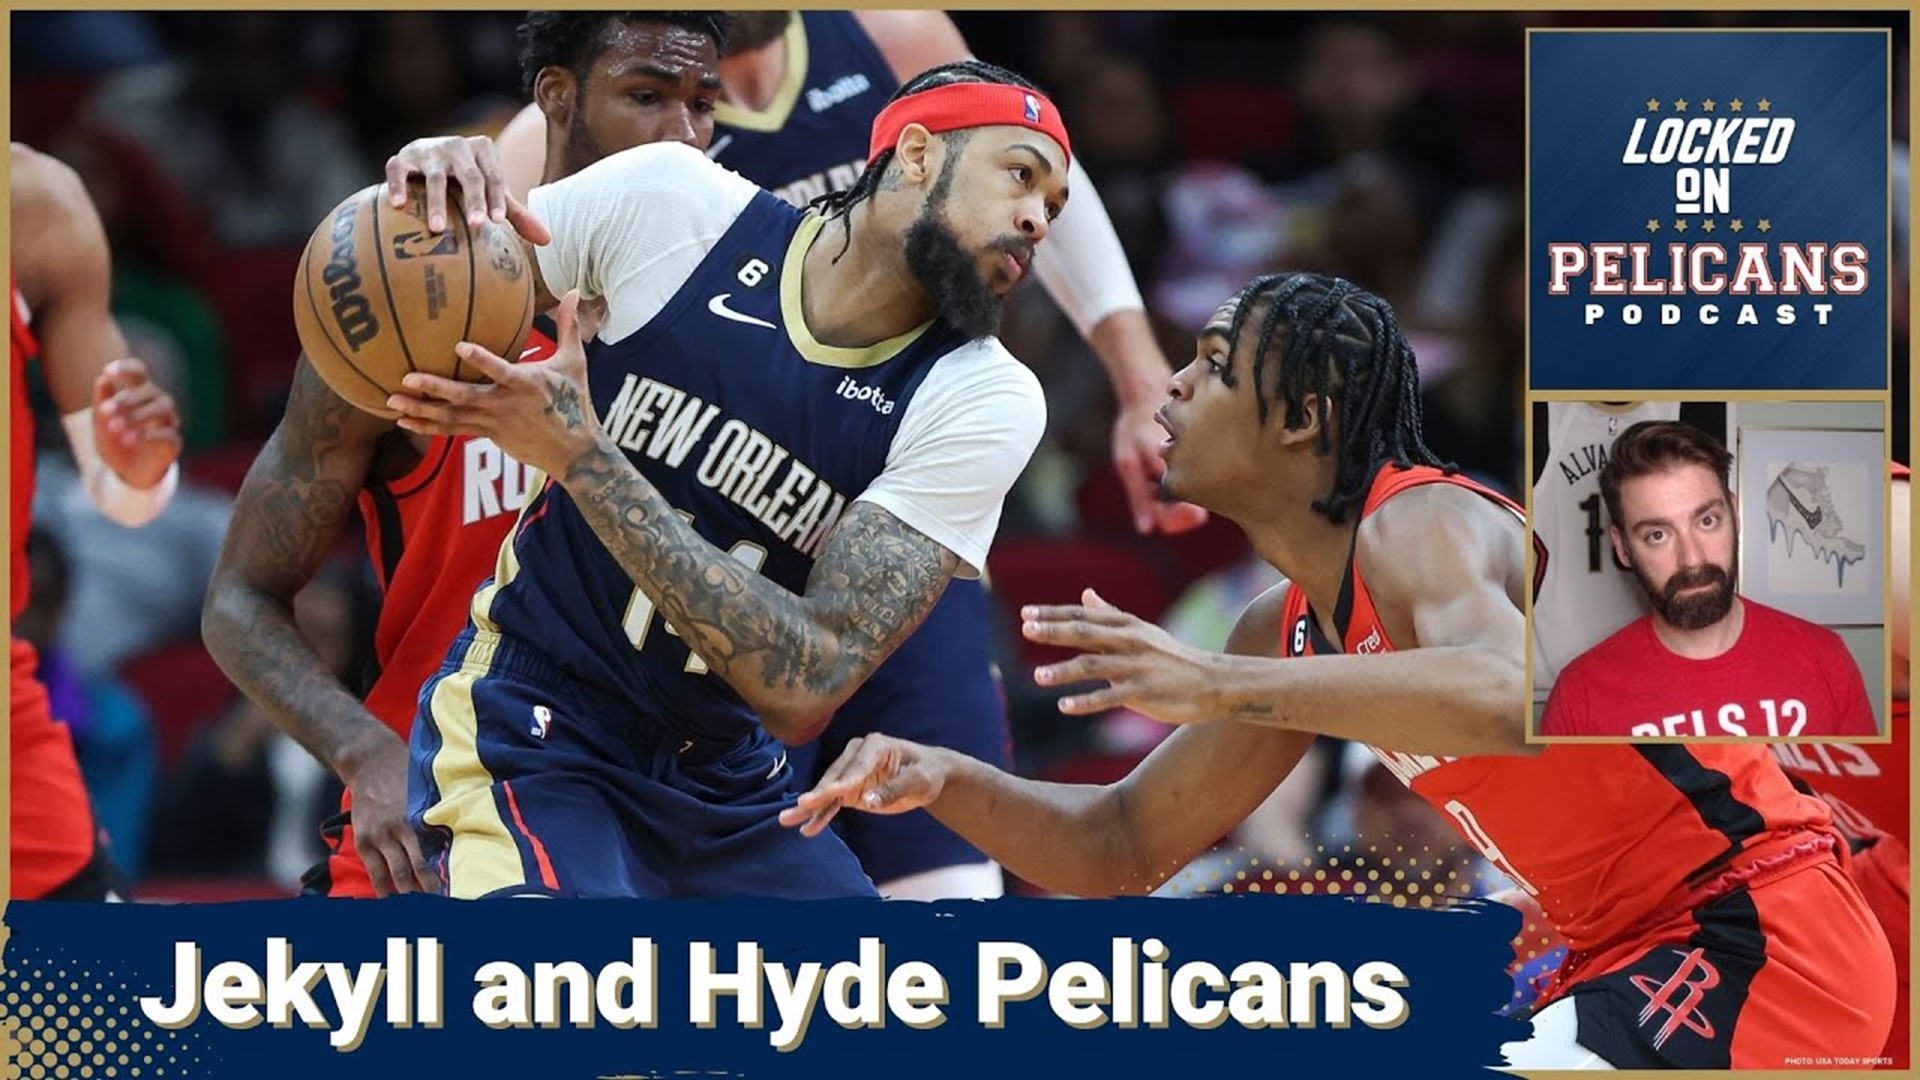 Are the New Orleans Pelicans the most frustrating team? A loss to the Houston Rockets followed up by a big win has Jake Madison begging for consistency.